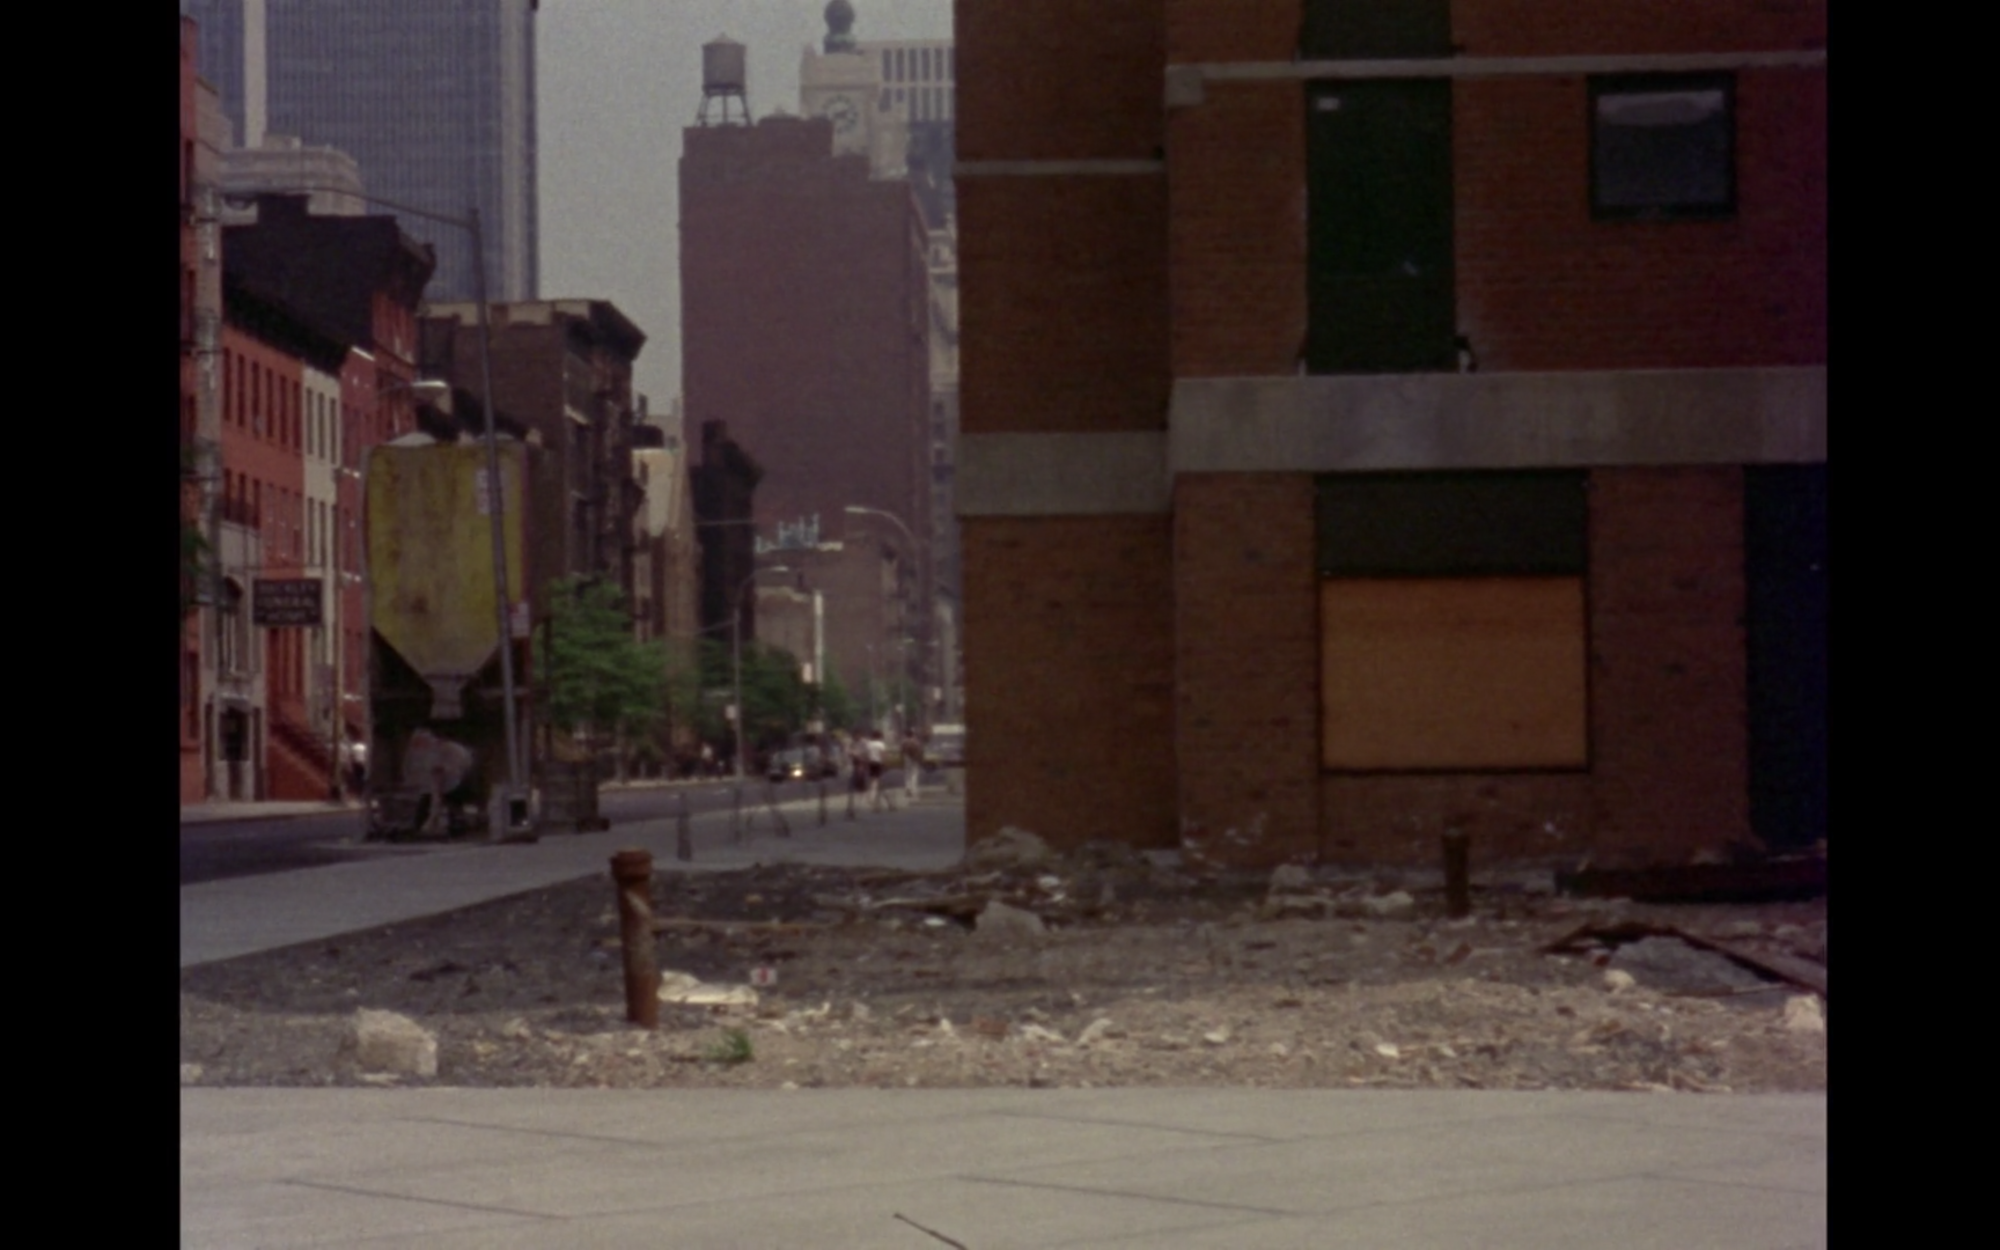 Screenshot from film News From Home of an empty lot in an urban area